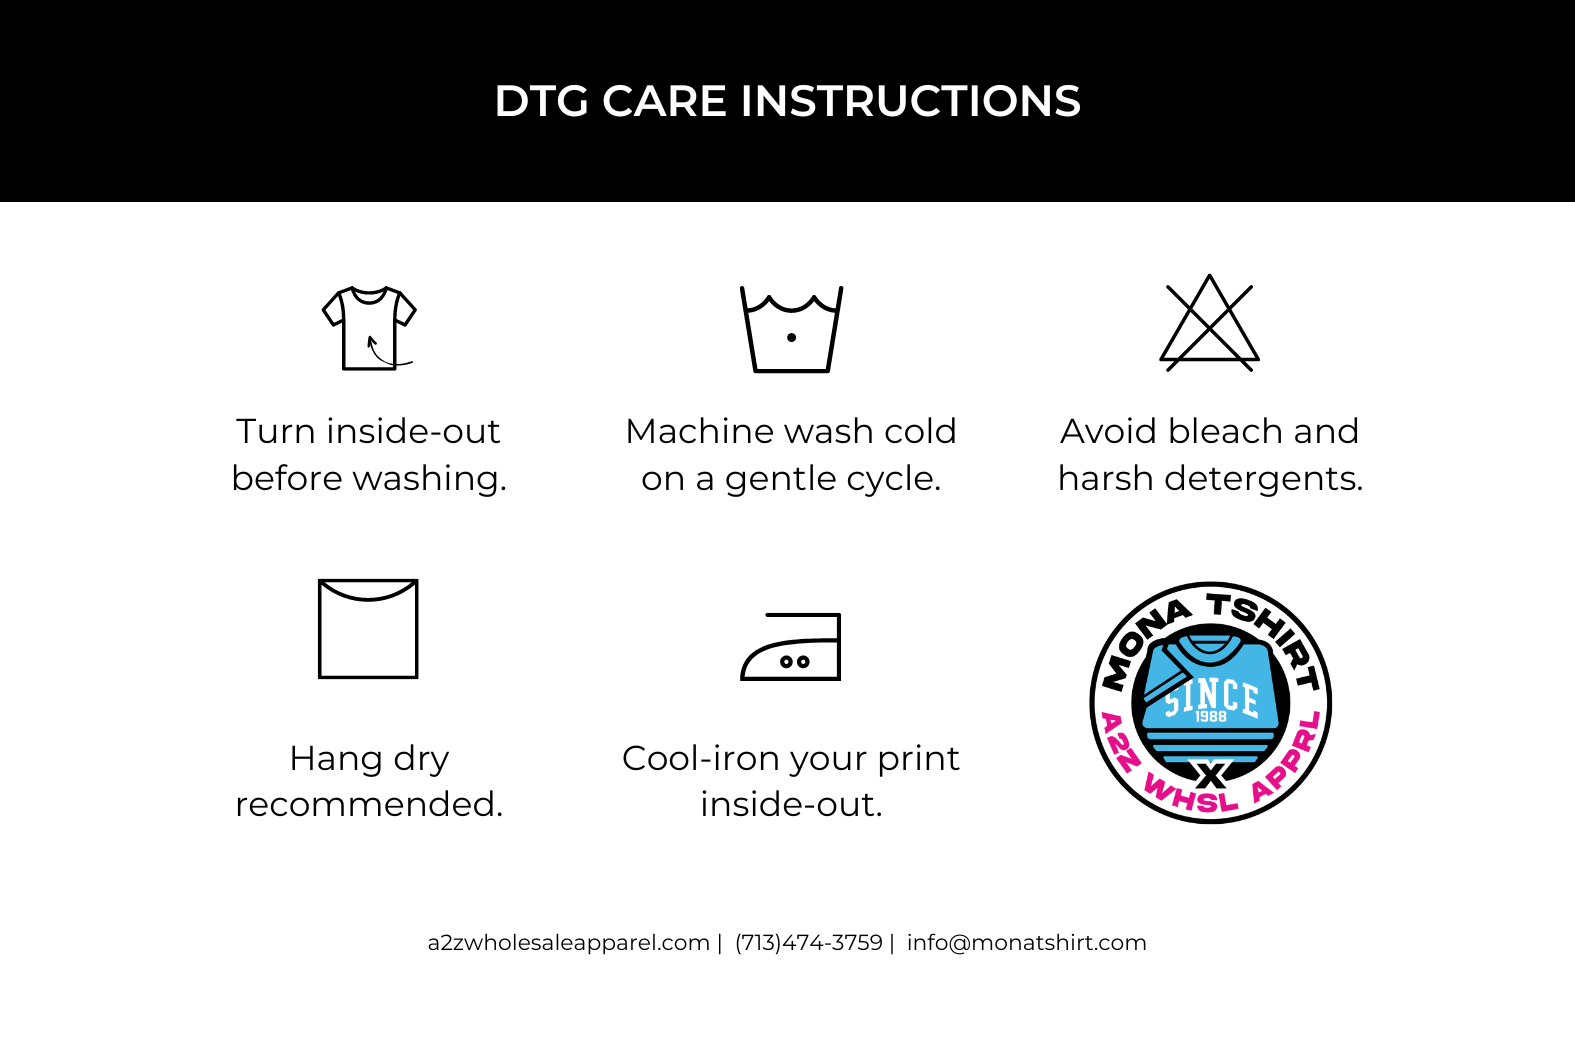 DTG printed apparel care instructions